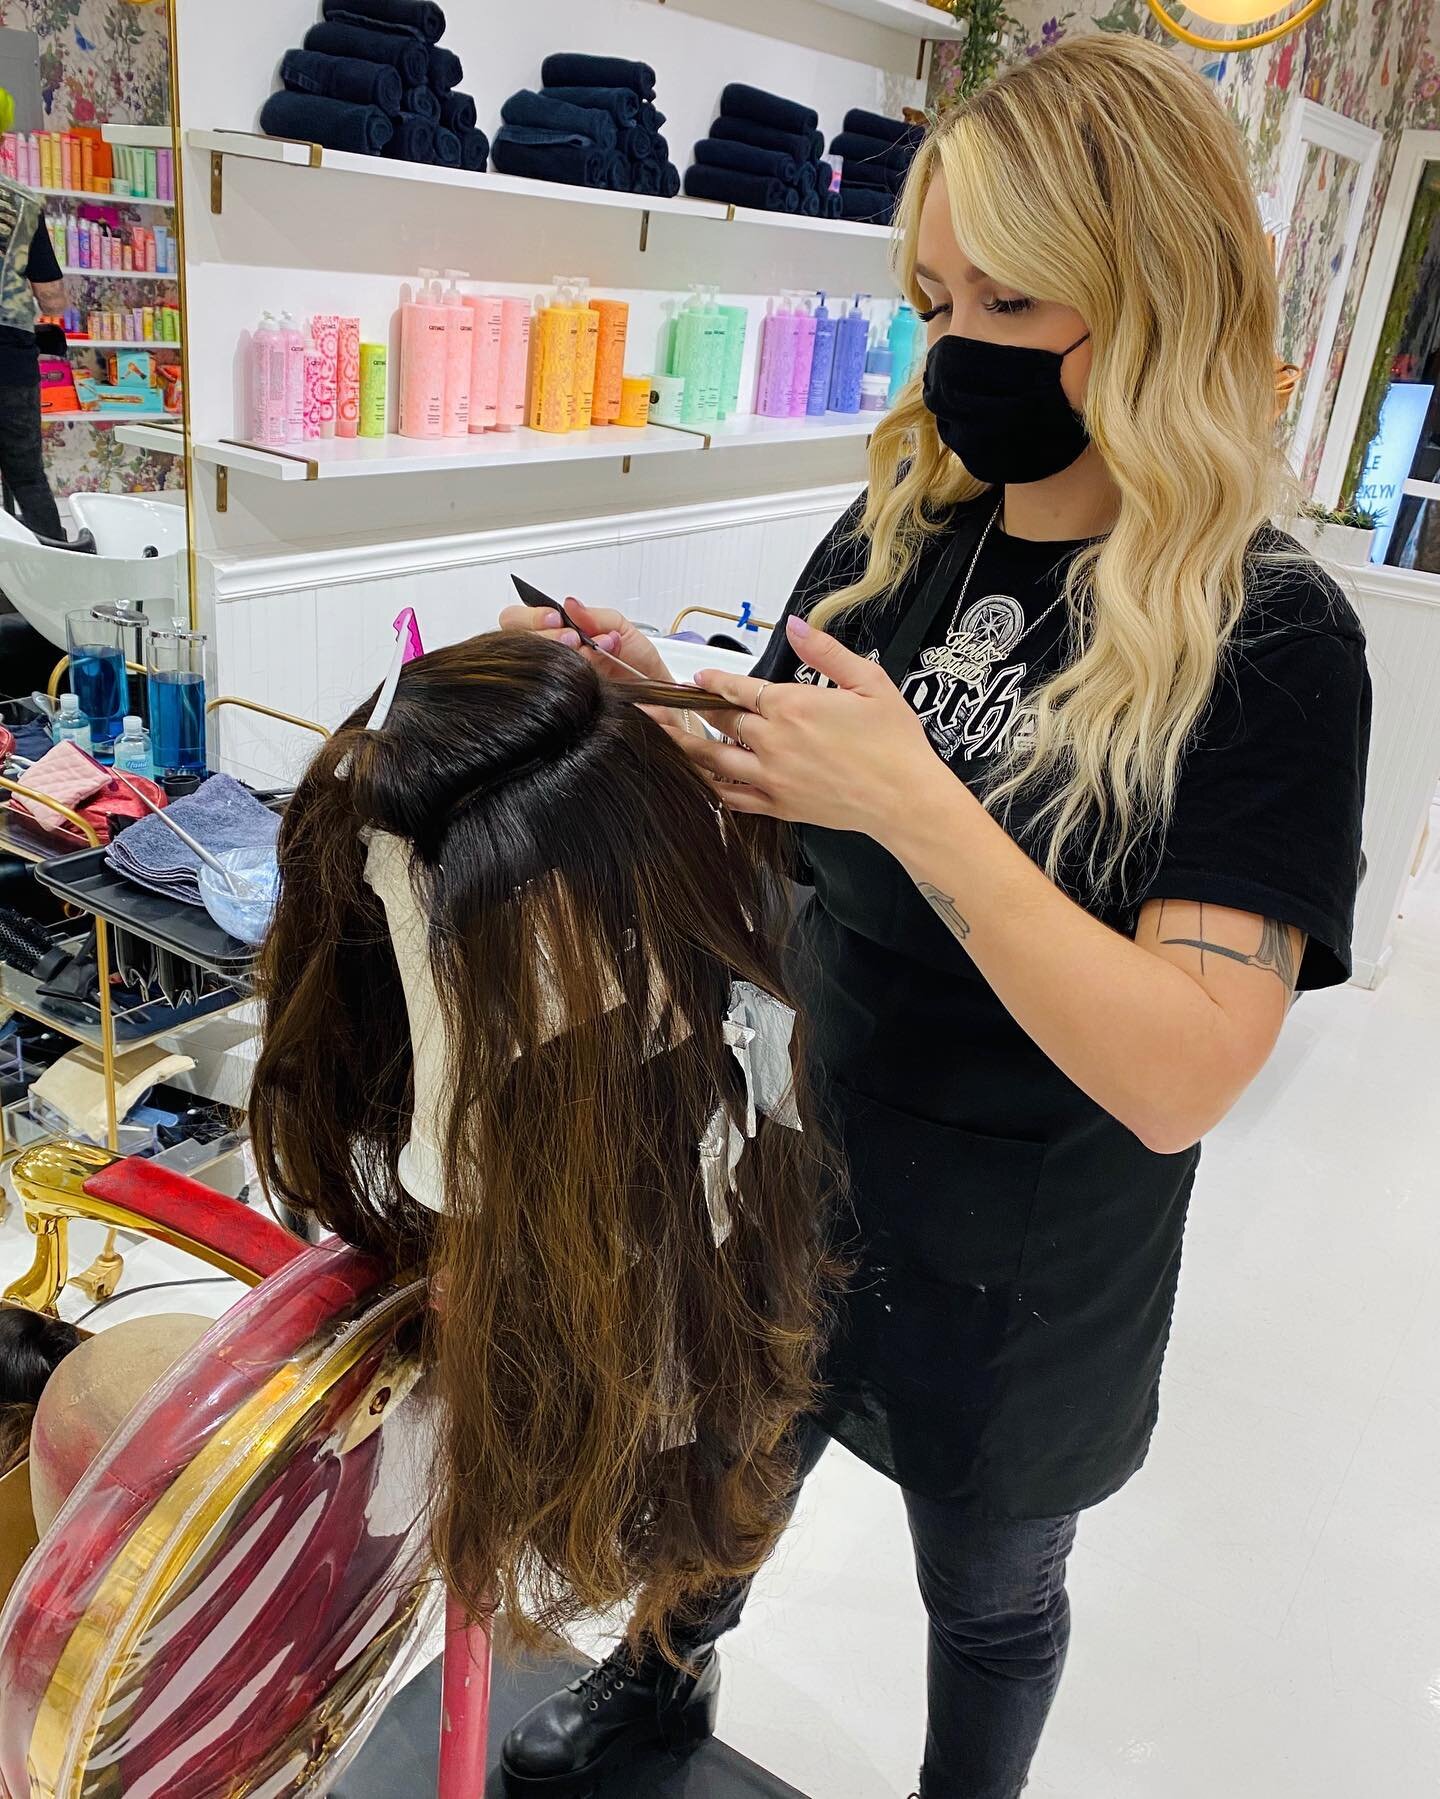 @janinewoodburnhair is wigging out!! Can you believe this is the eighth wig she has colored in the past 2 weeks 👏🏻👏🏻👏🏻 Ask us about custom wig and hair extension coloring. Our expert colorists do it all. Book an complimentary consultation with 